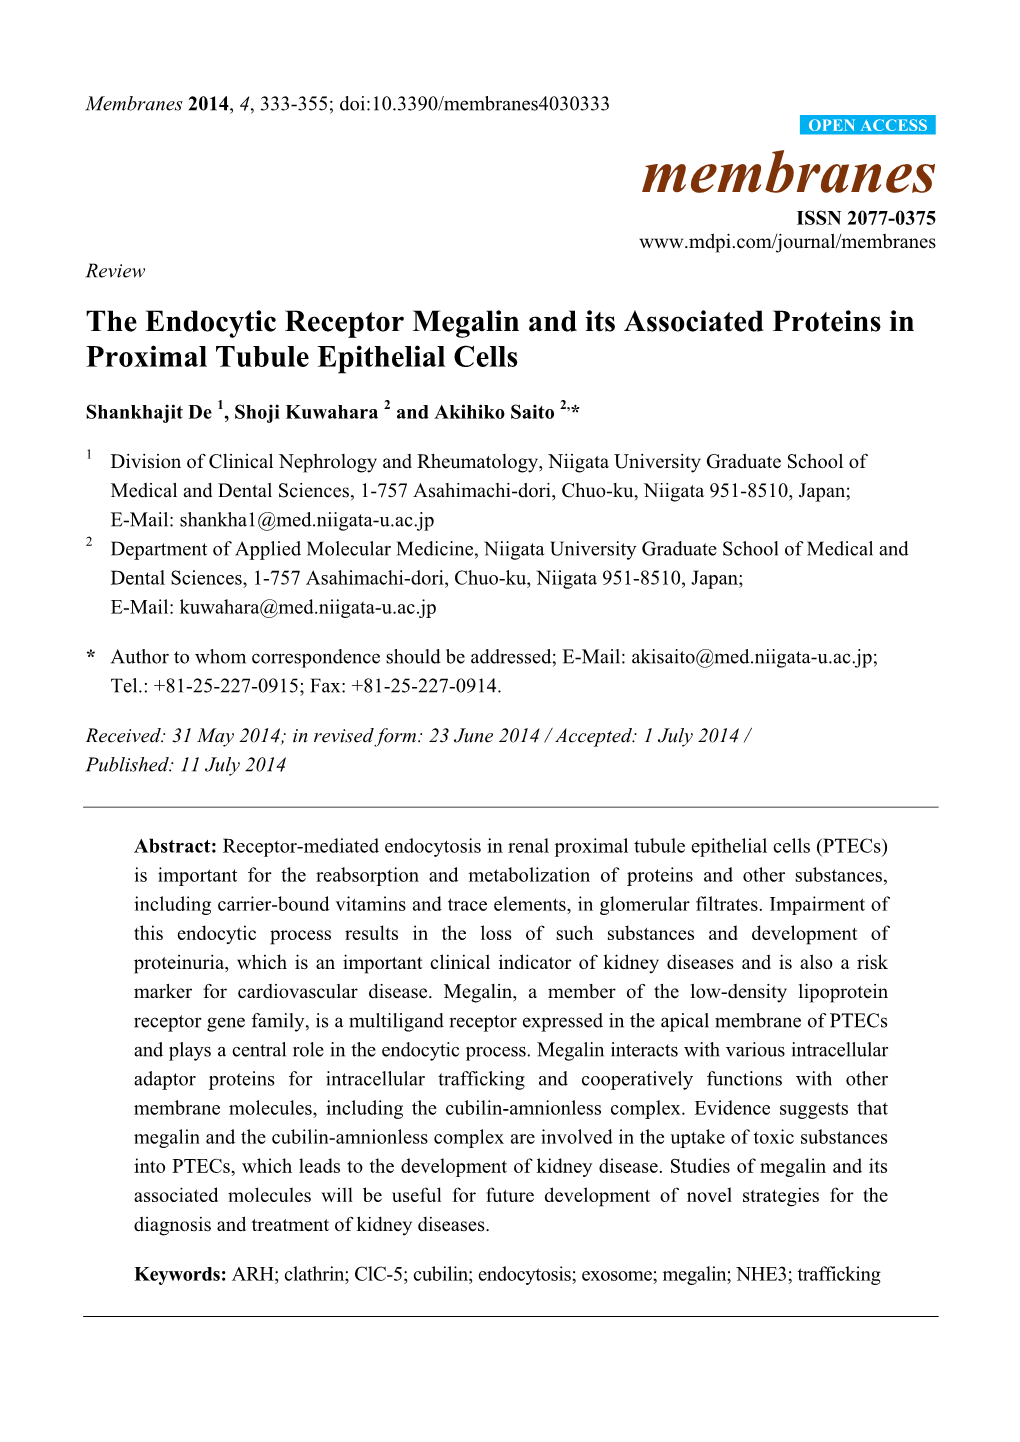 The Endocytic Receptor Megalin and Its Associated Proteins in Proximal Tubule Epithelial Cells